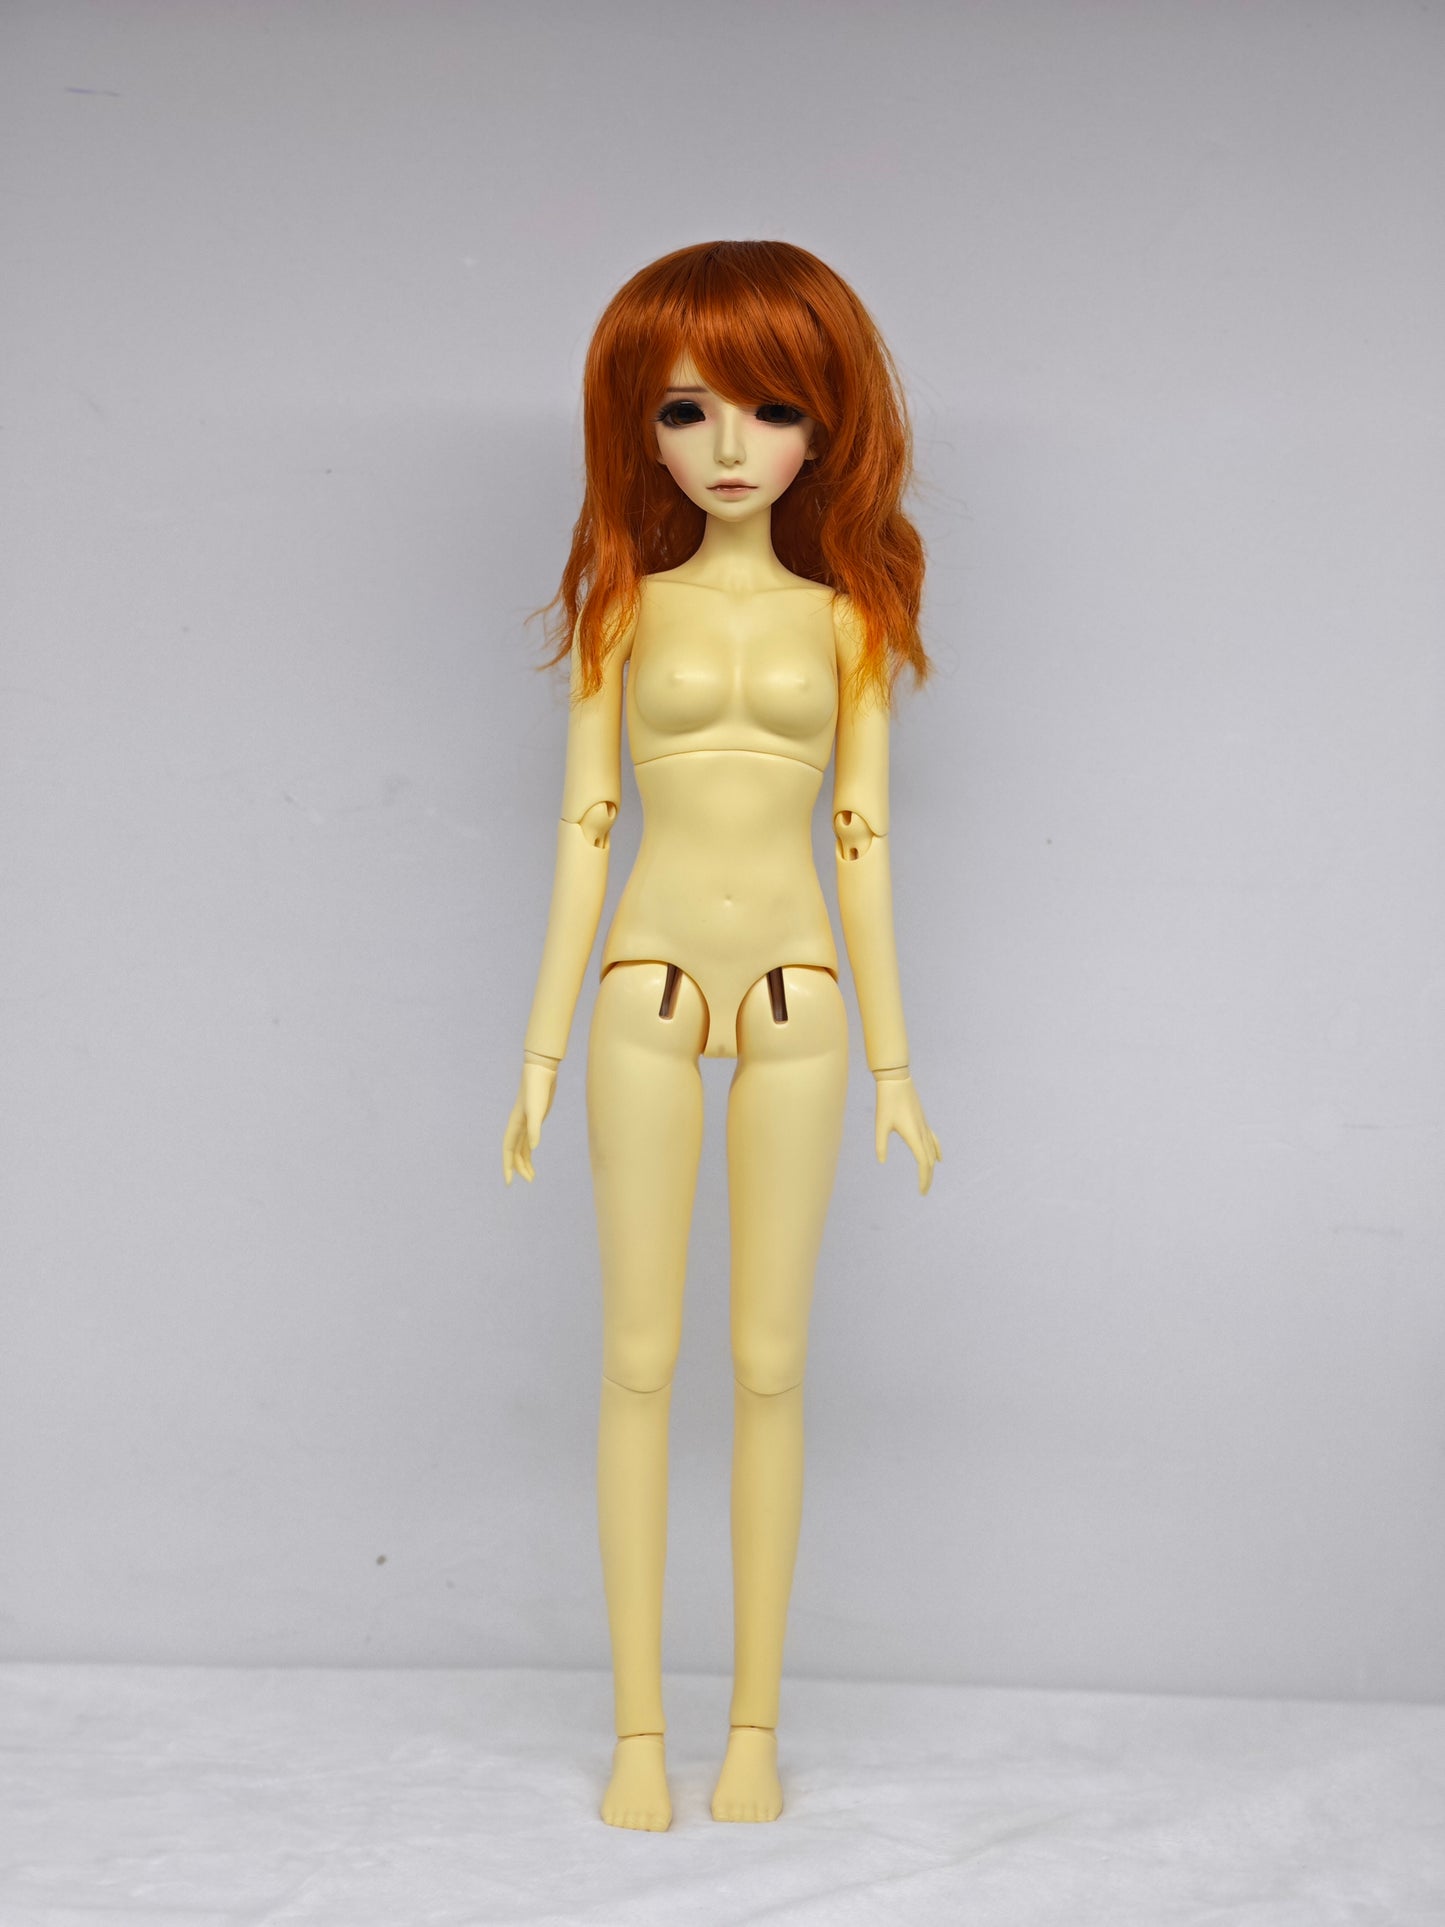 1/4 girl doll chu in yellow skin with makeup and wig